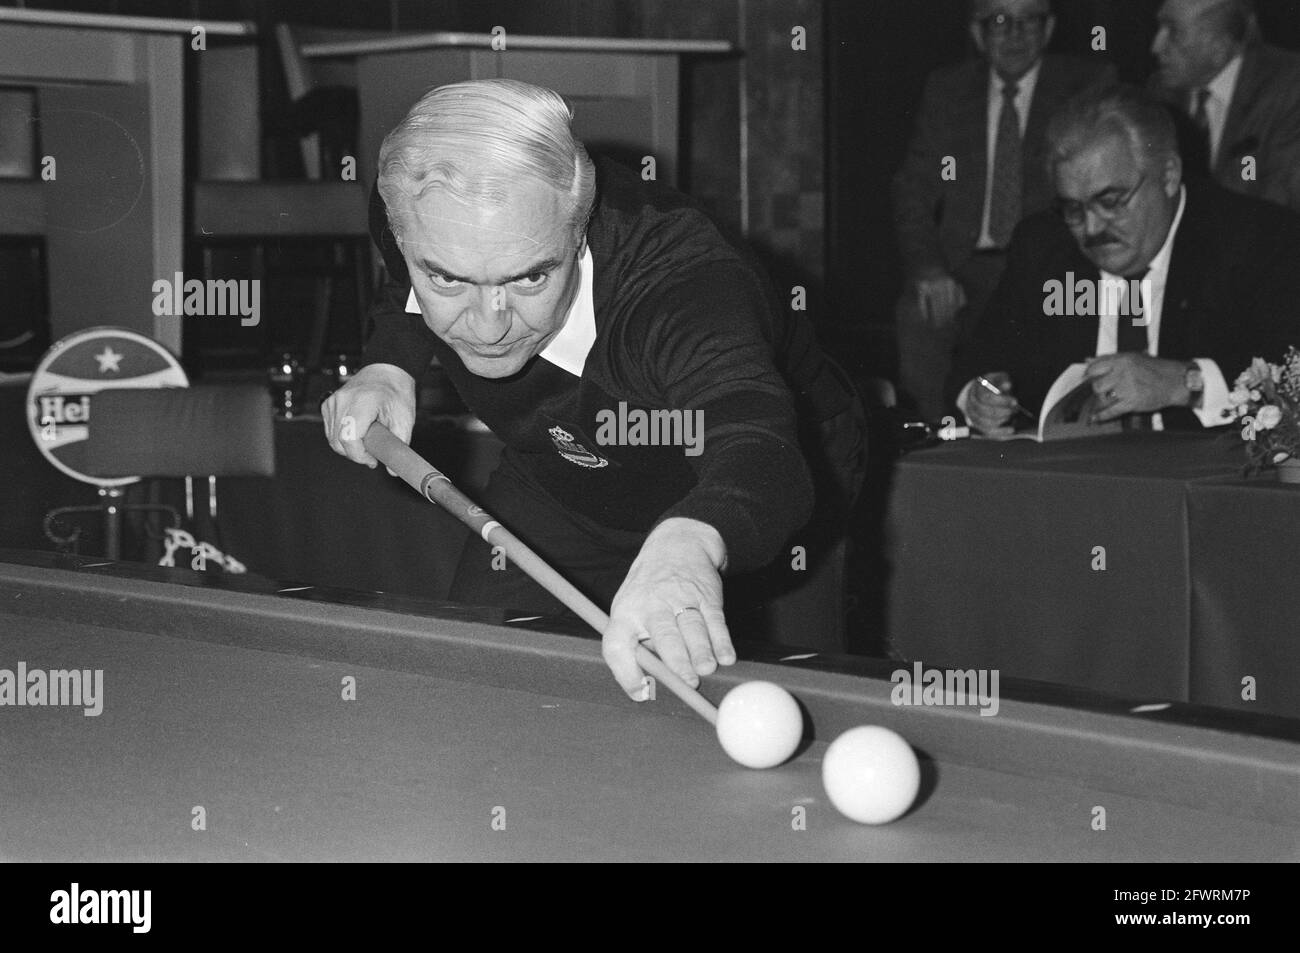 Dutch Championships Billiards Artillery in Haarlem. Van Oosterhout in action, January 9, 1982, BILJARTEN, CHAMPIONSHIPS, The Netherlands, 20th century press agency photo, news to remember, documentary, historic photography 1945-1990, visual stories, human history of the Twentieth Century, capturing moments in time Stock Photo